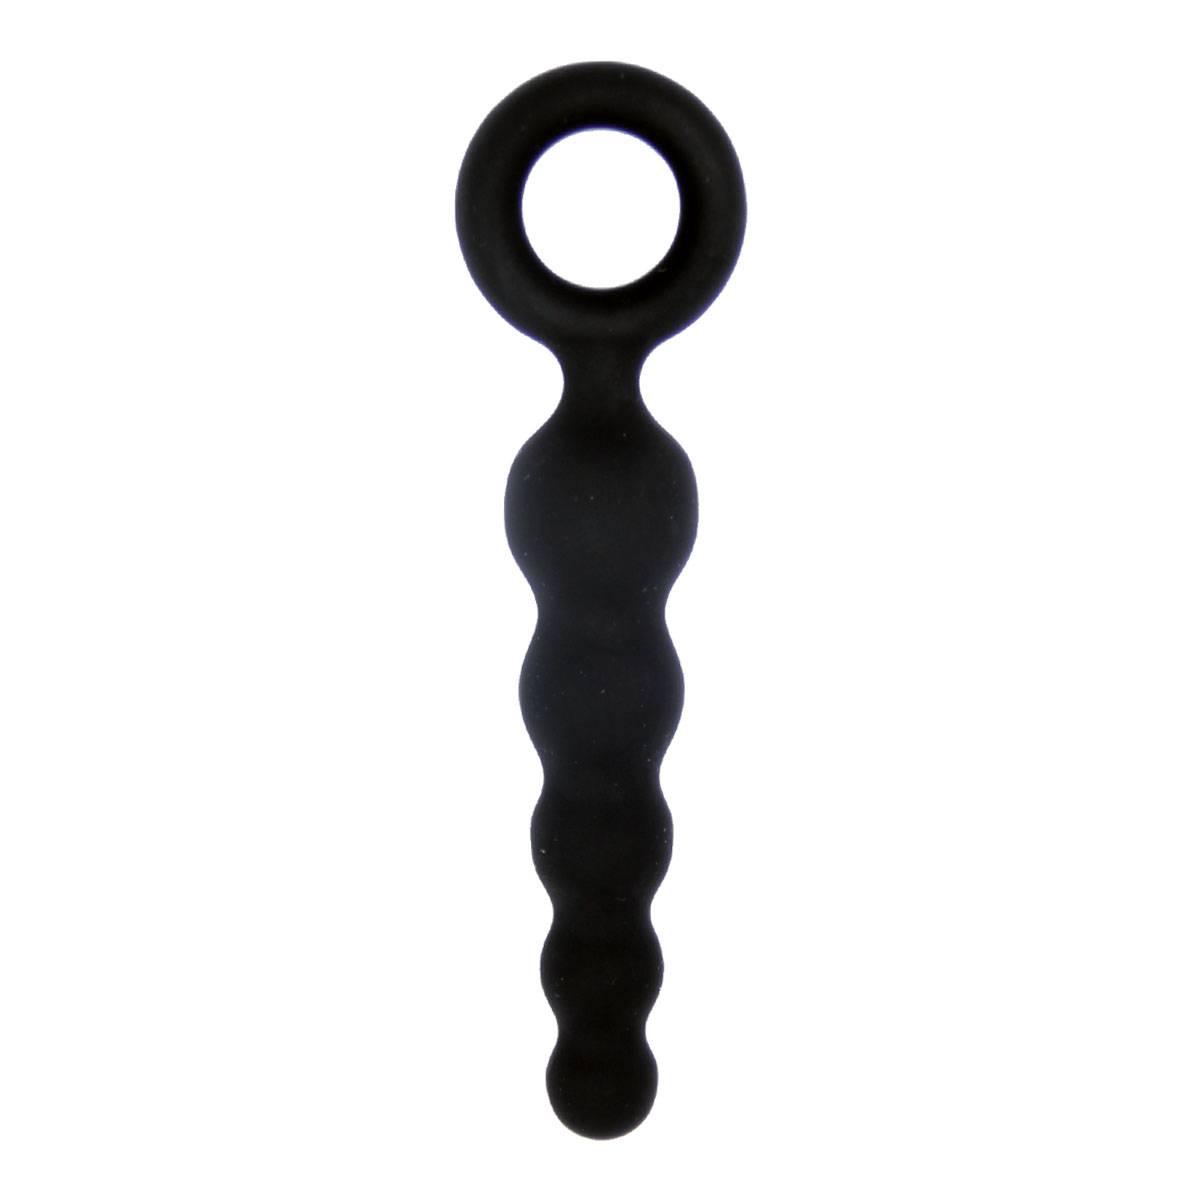 Anal Beads Plug in Black Color